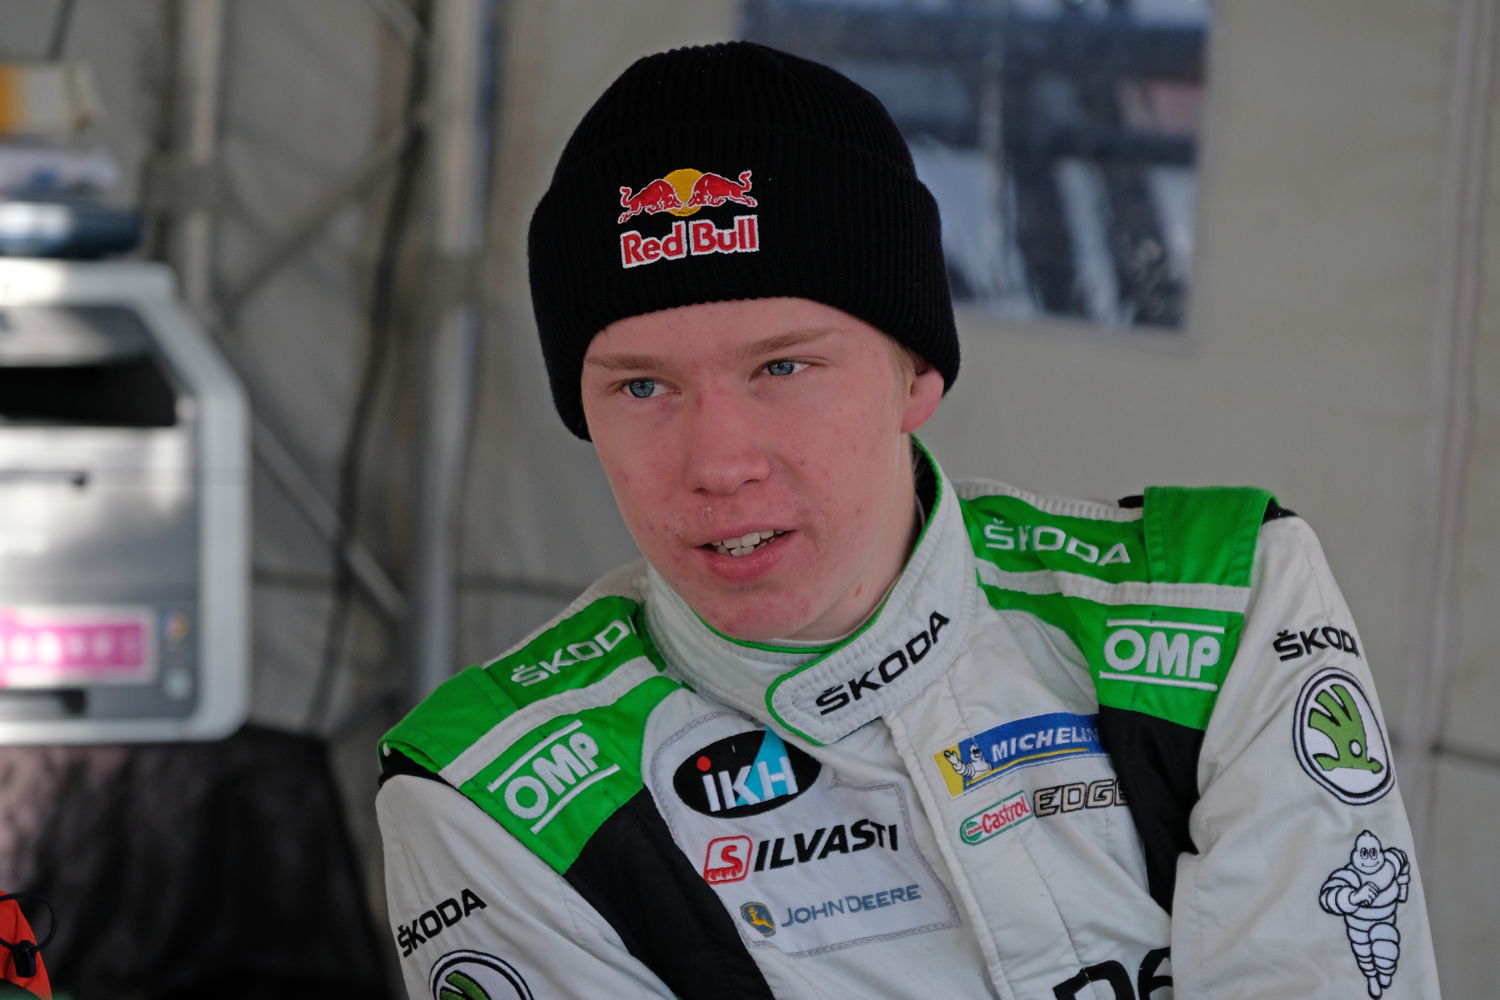 Kalle Rovanperä (ŠKODA FABIA R5), currently third in the WRC 2 Pro category standings of the FIA World Rally Championship, is competing for the first time at the Corsican rally.